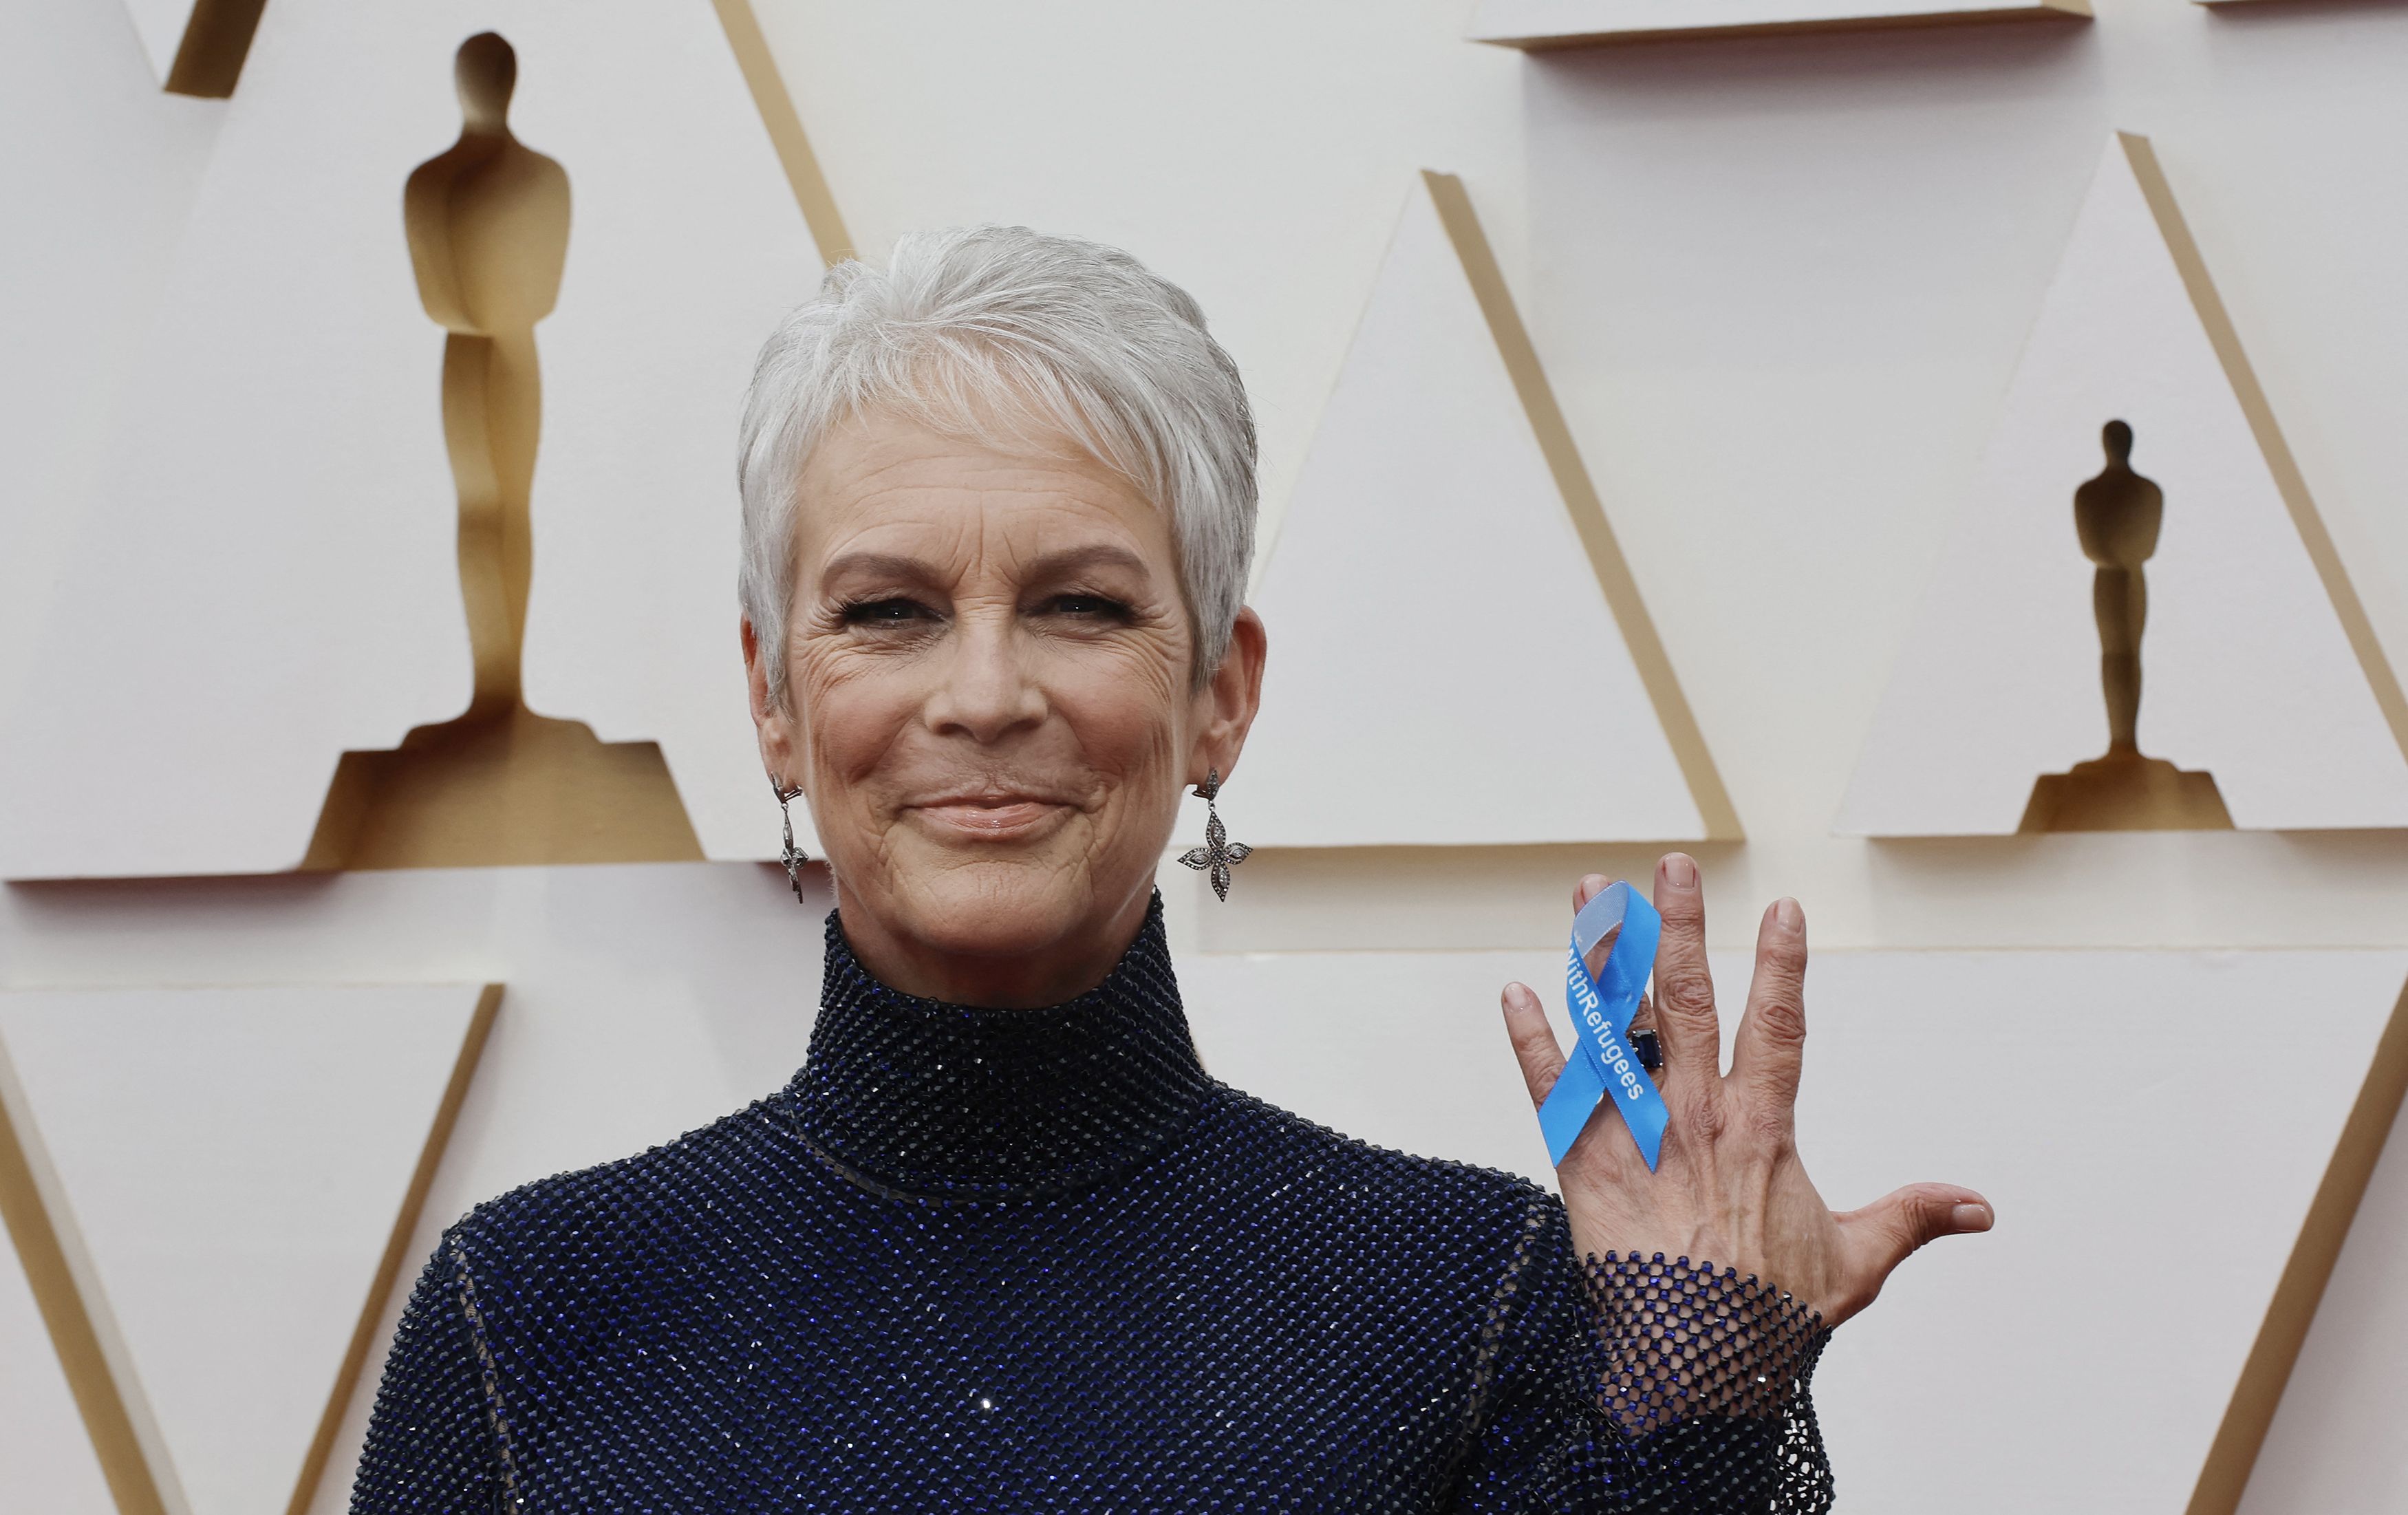 Jamie Lee Curtis holds a ribbon reading "With Refugees" supporting global refugees as she poses on the red carpet during the Oscars arrivals at the 94th Academy Awards in Hollywood, Los Angeles, California, U.S., March 27, 2022. REUTERS/Eric Gaillard